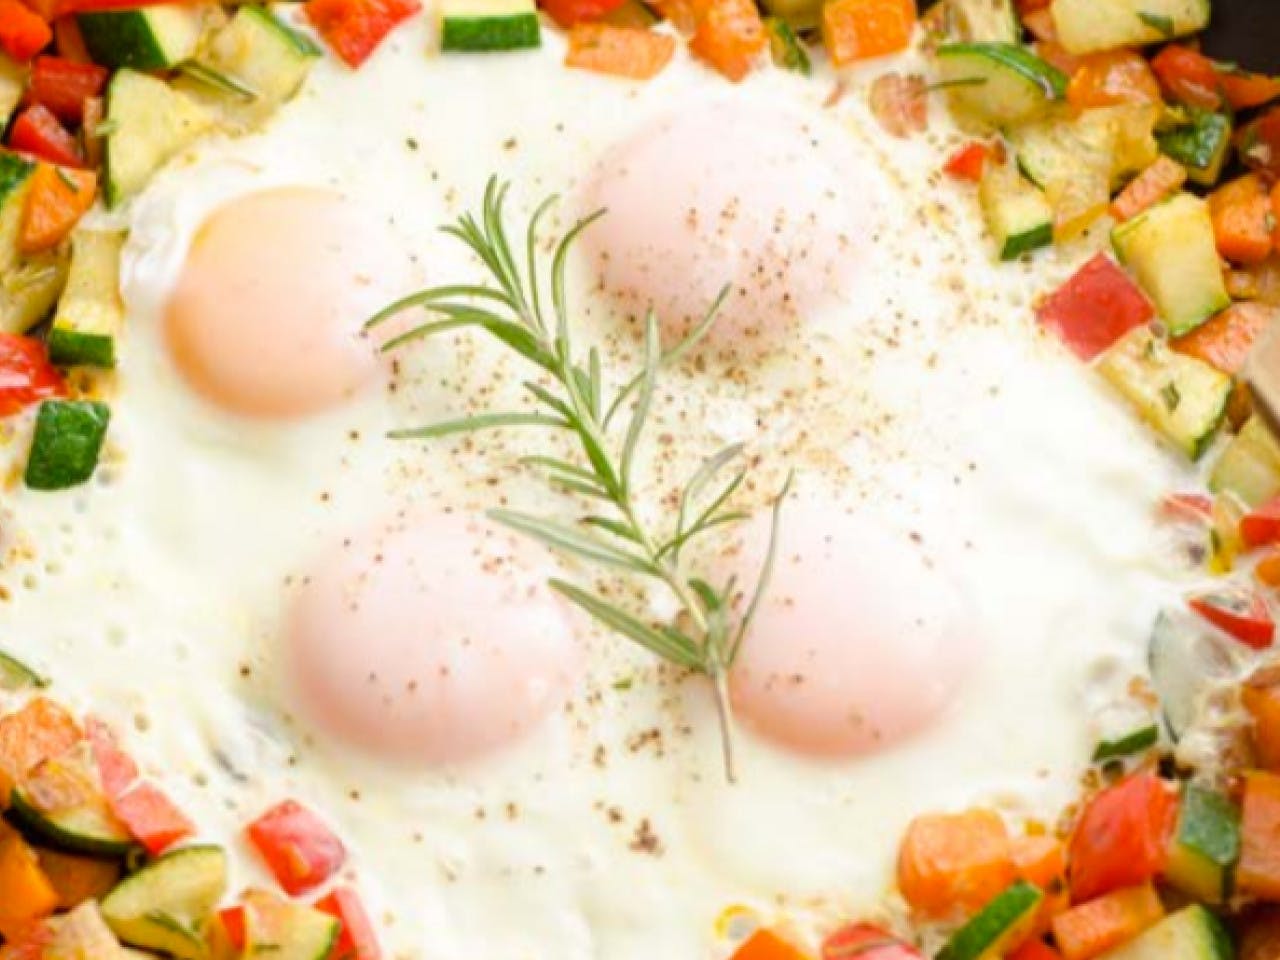 Easy single pan dish with egg and vegetables